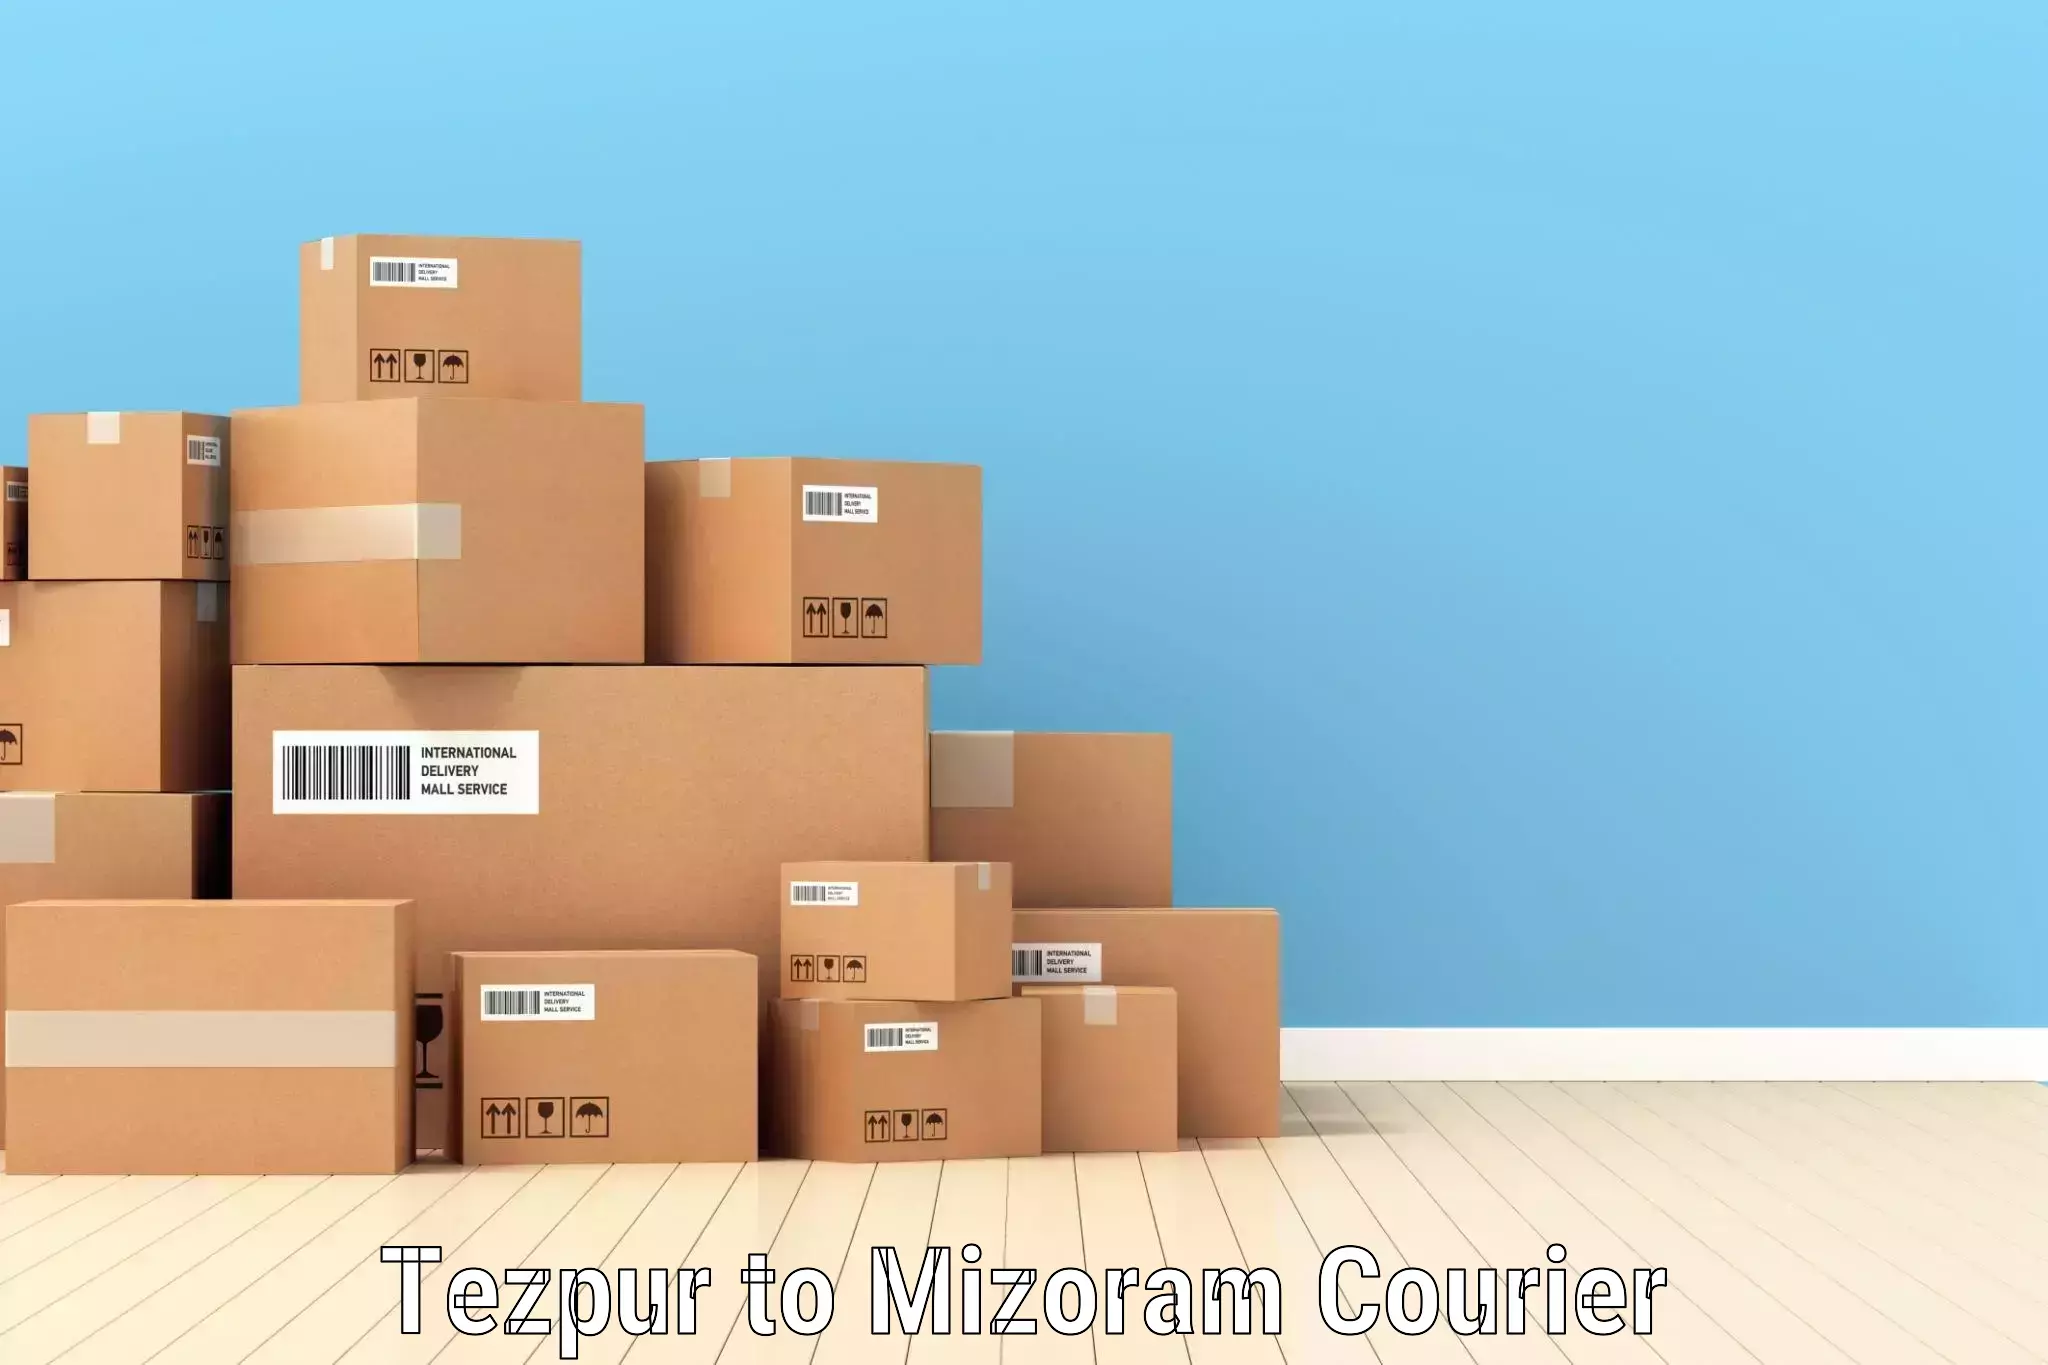 Multi-national courier services Tezpur to Darlawn